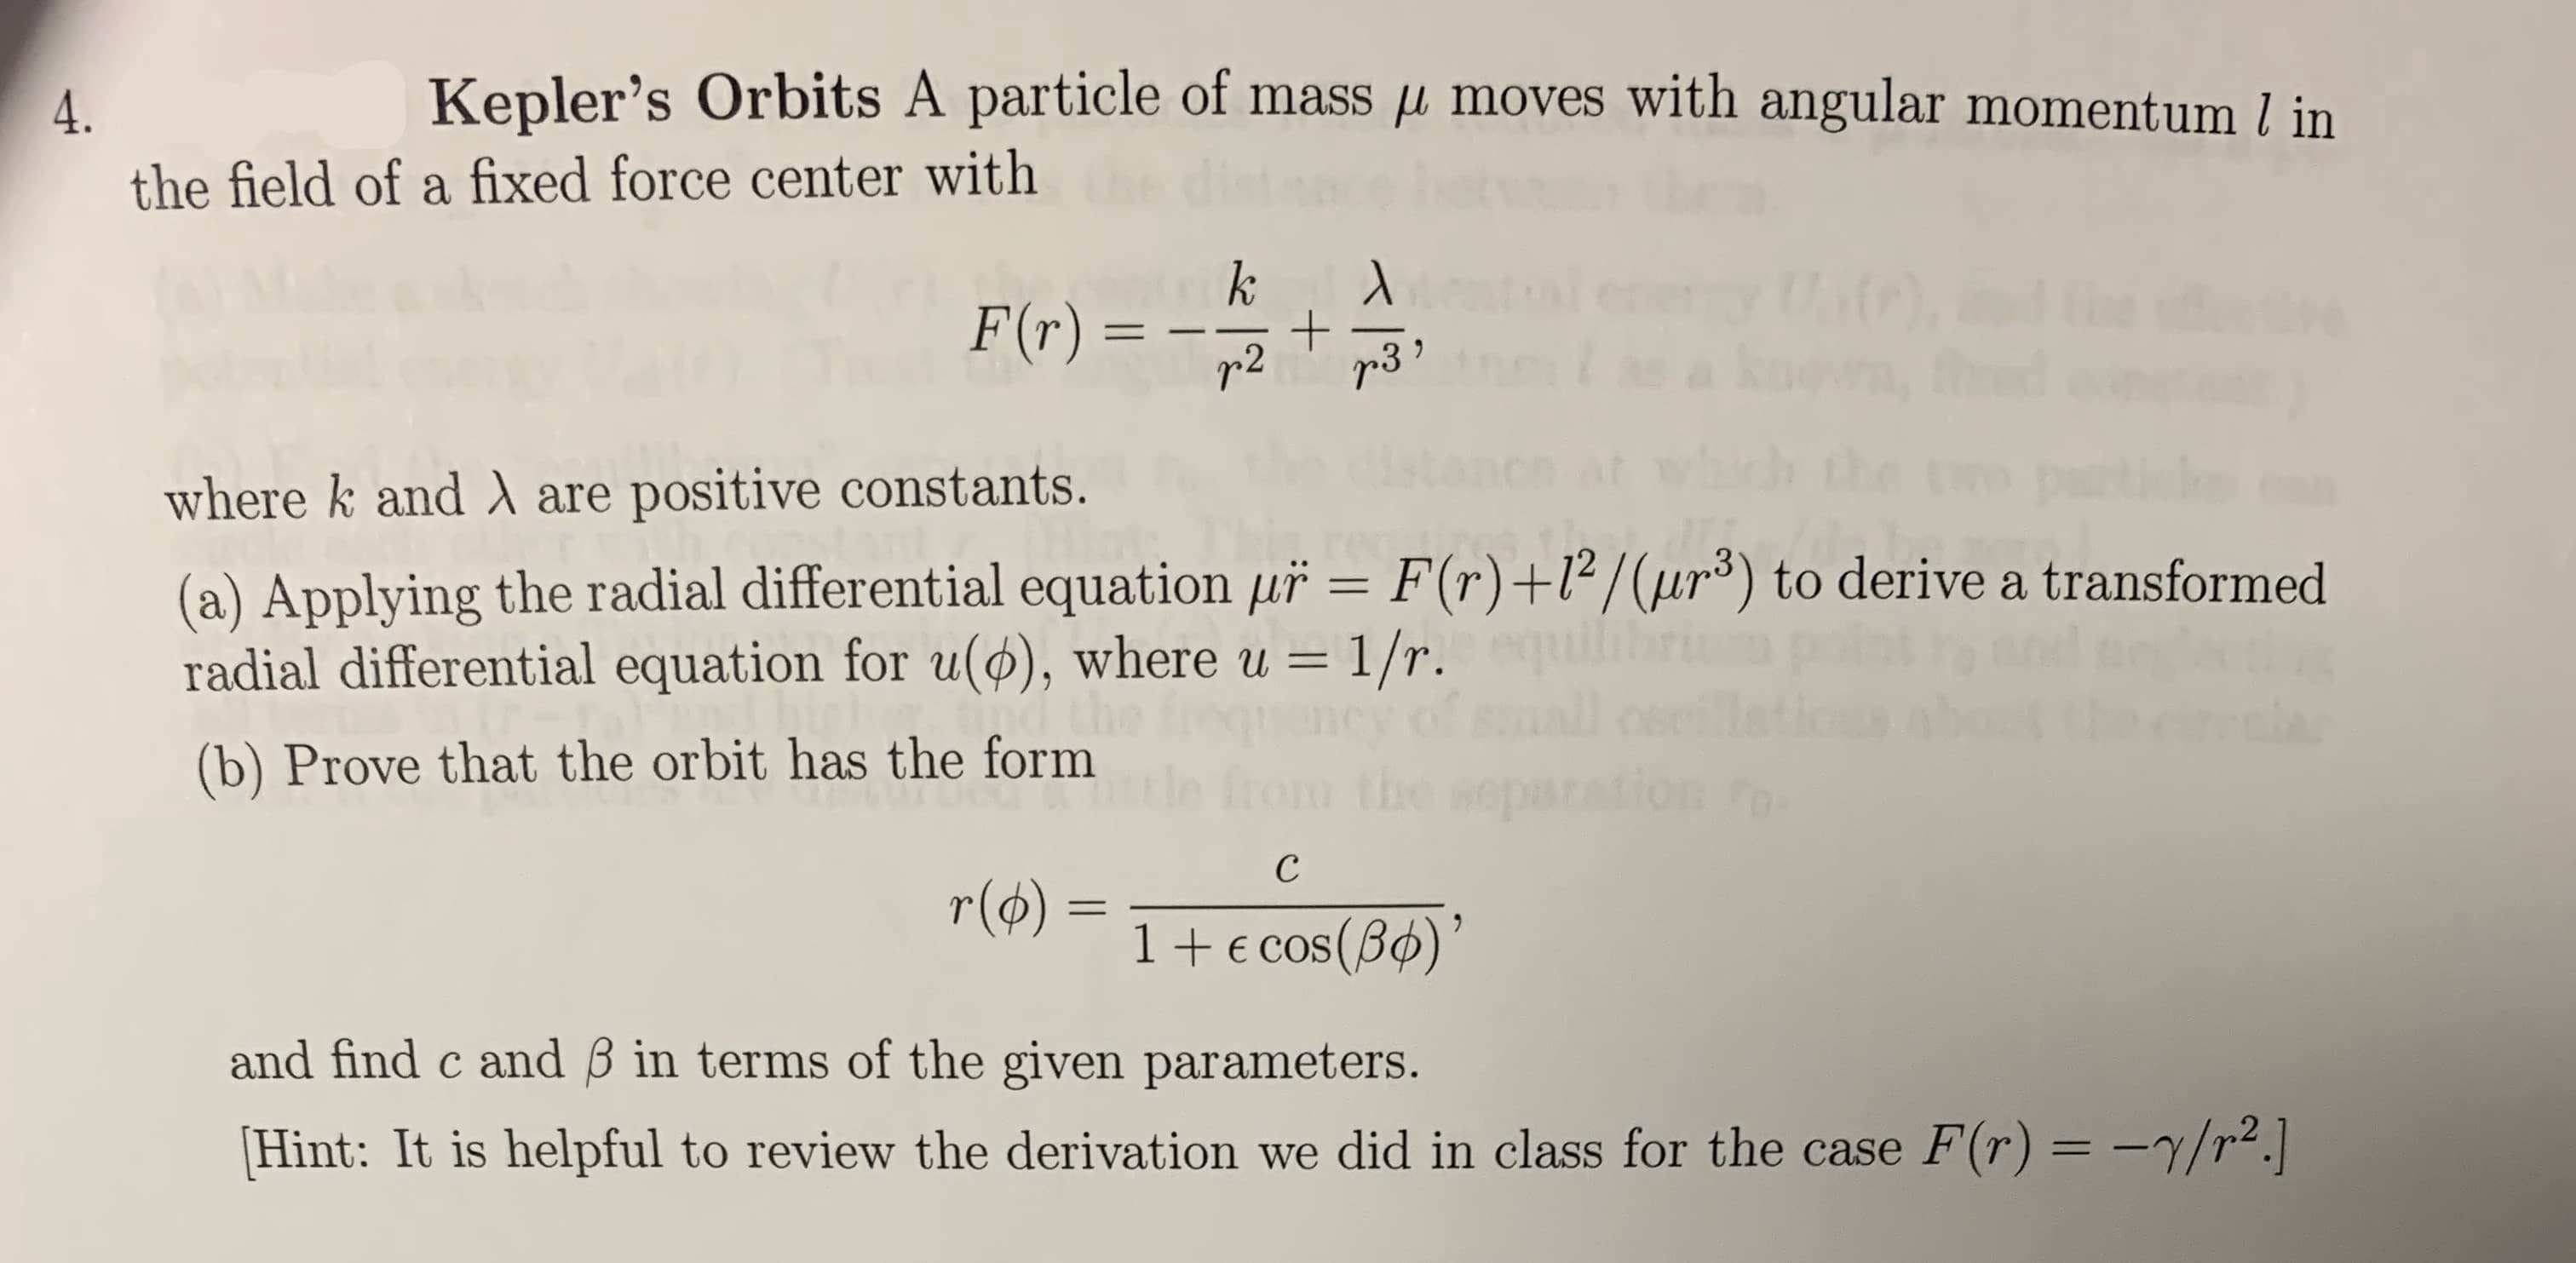 Kepler's Orbits A particle of mass p moves with angular momentum l in
the field of a fixed force center with
k
F(r) =
+
r3
r 2
where k and A are positive constants.
(a) Applying the radial differential equation uř = F(r) +l2/(ur3) to derive a transformed
radial differential equation for u(), where u = 1/r.
(b) Prove that the orbit has the form
tle from the separation
с
r(o)
1+E cos (B)
and find c and B in terms of the given parameters.
Hint: It is helpful to review the derivation we did in class for the case F(r) = -7/r2.
